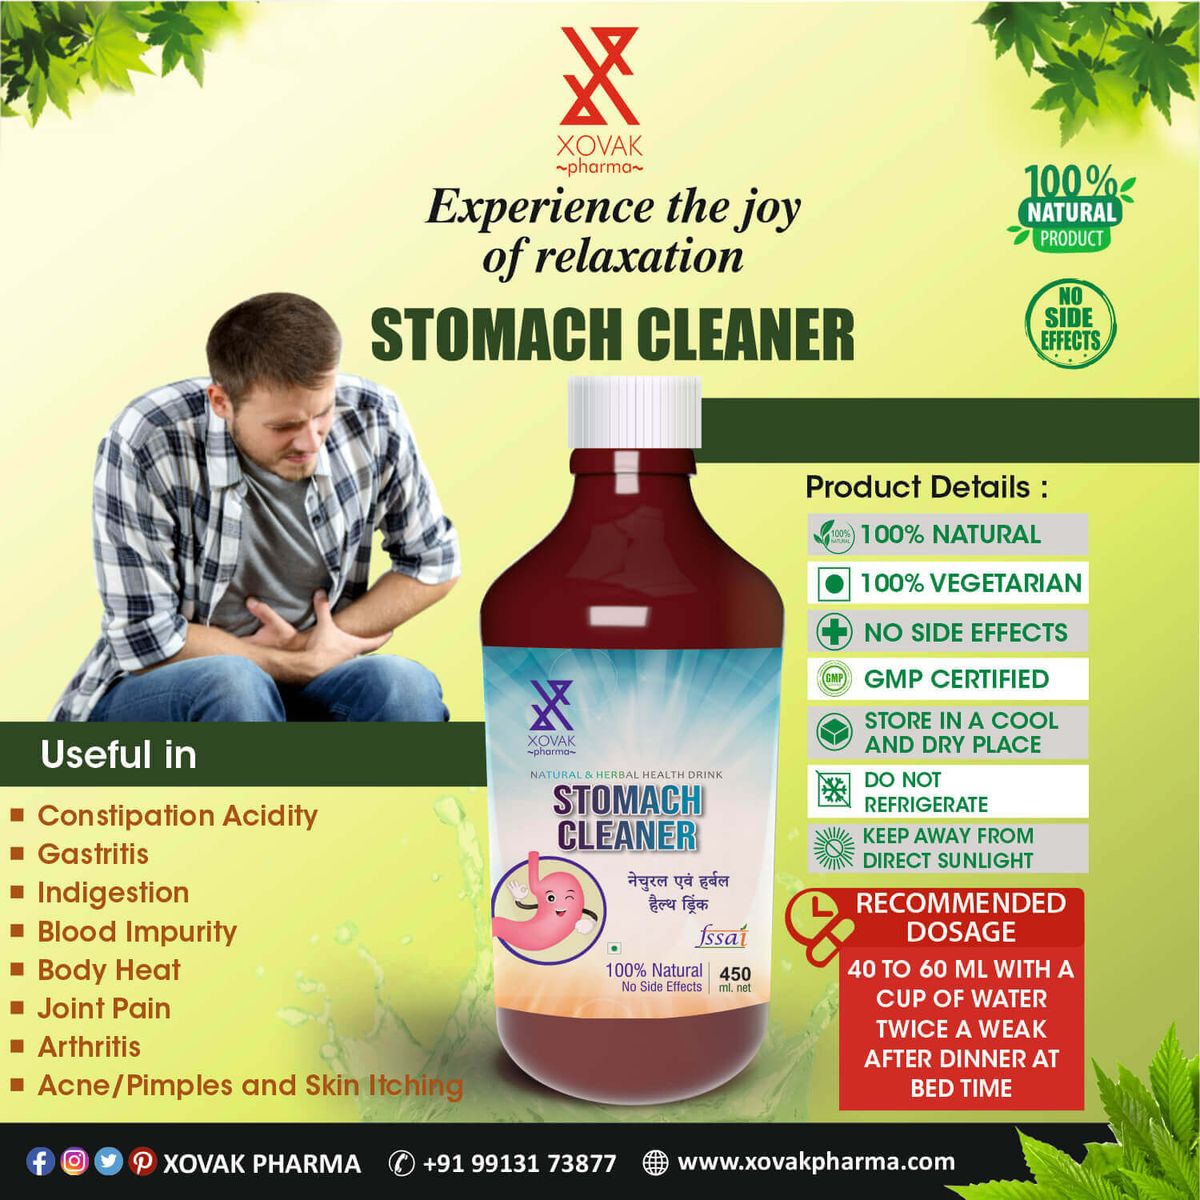 Buy Xovak Pharma Stomach Cleaner for Constipation, Acidity & Indigestion at Best Price Online